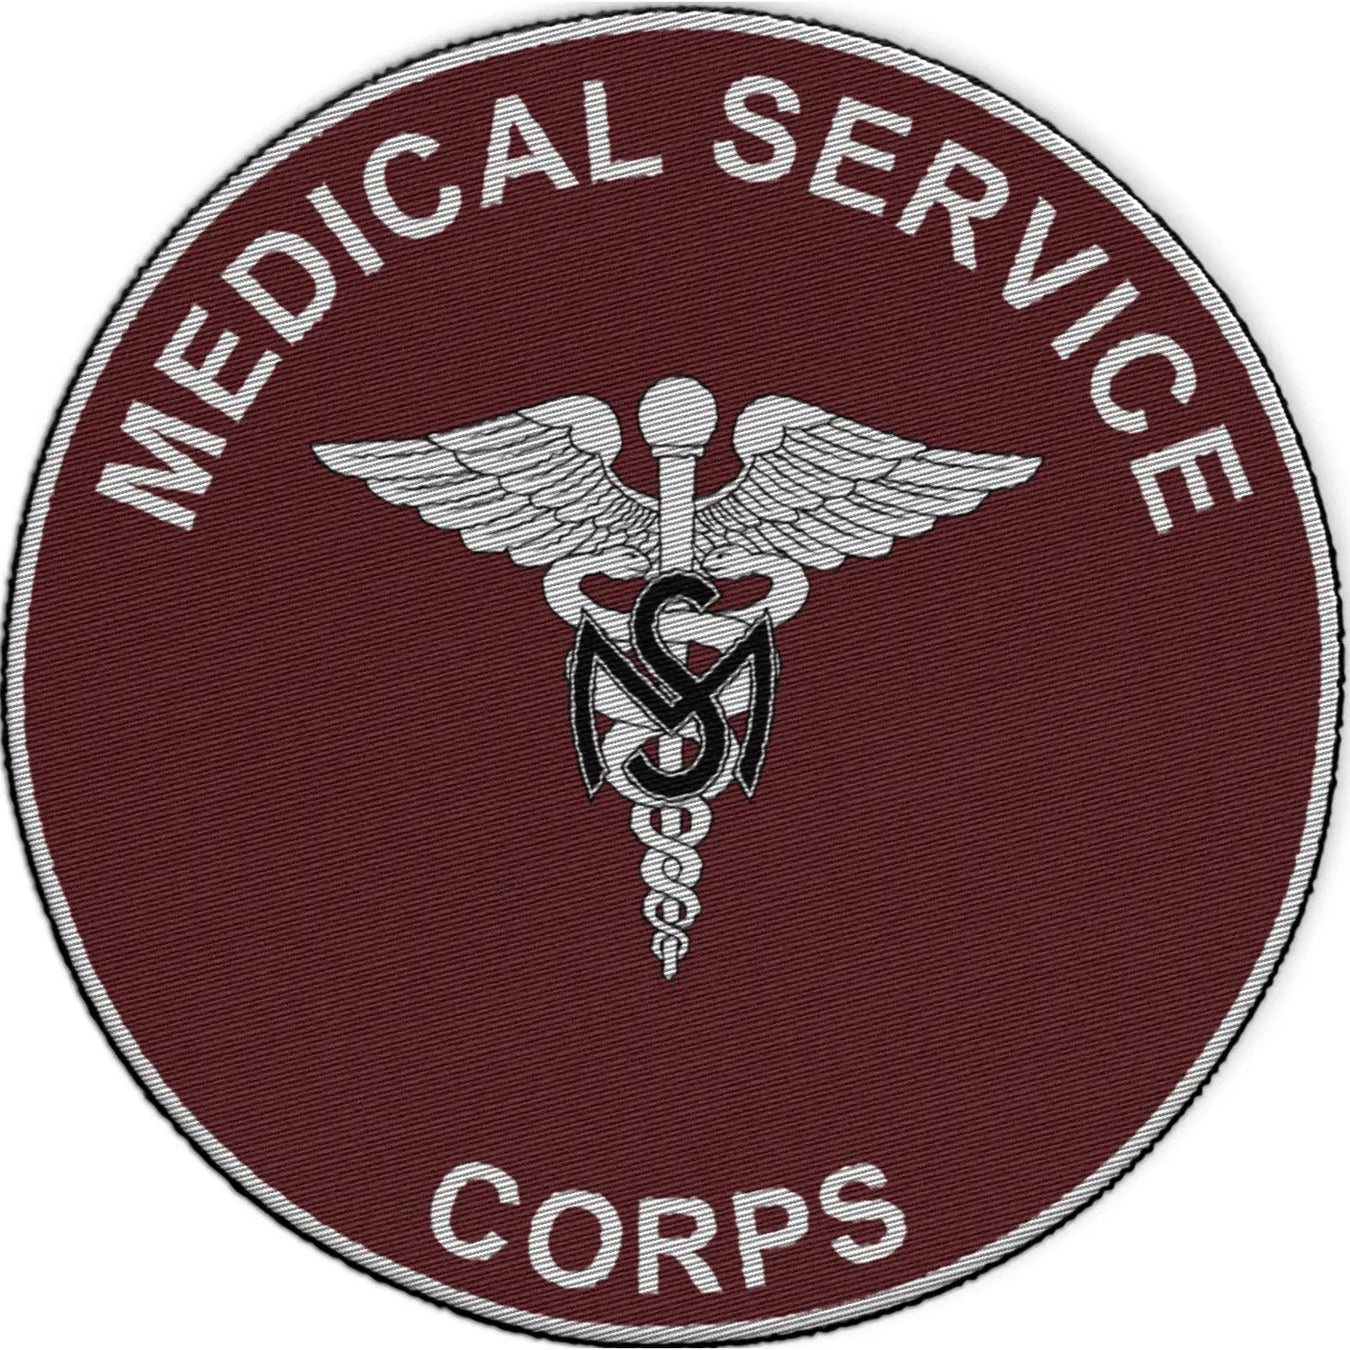 U.S. Army Medical Service Corps Patches